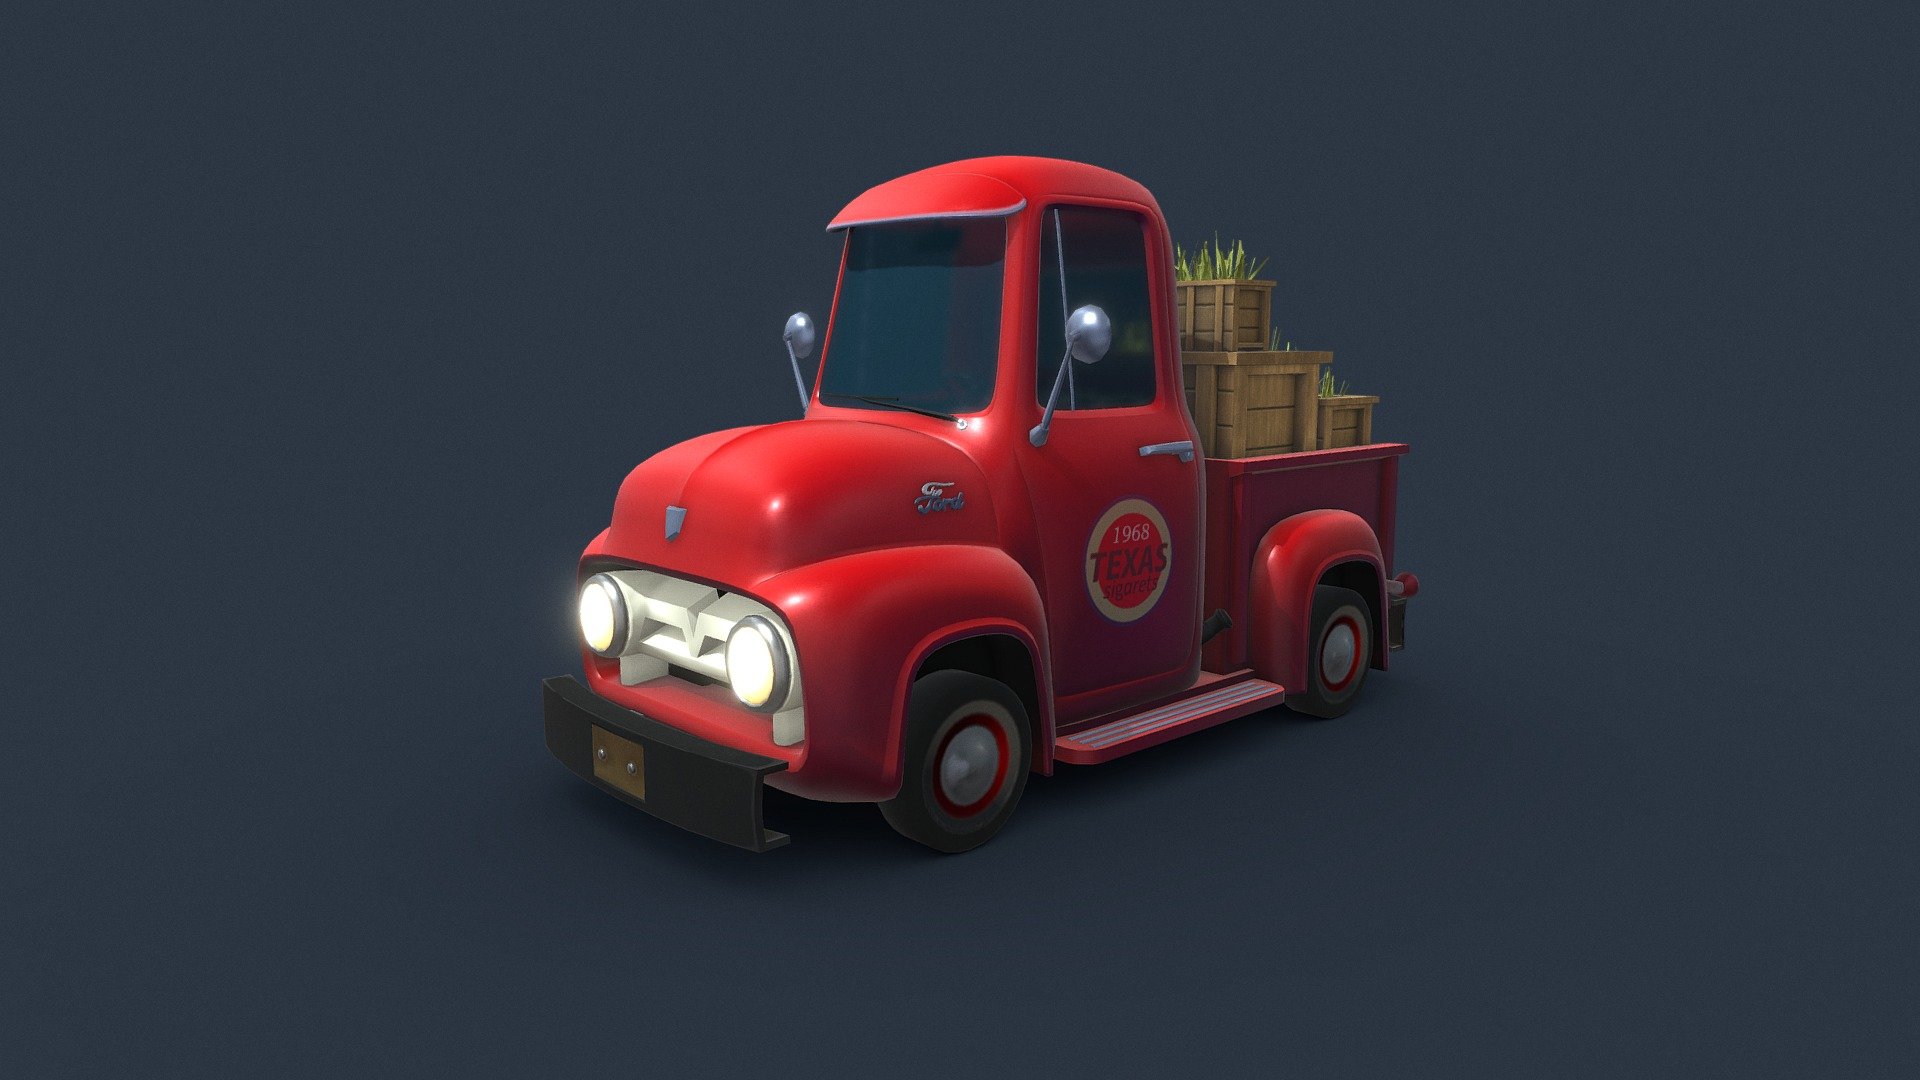 Beep Beep! Check it out, i’ll be glad if you share your opinion about it.

Concept art: https://www.behance.net/mazarat

Subscribe to me not to miss my next works.

Don't forget to look my Artstation page https://www.artstation.com/progressive - Ford-f100 - 3D model by OVA (@ovaland) 3d model